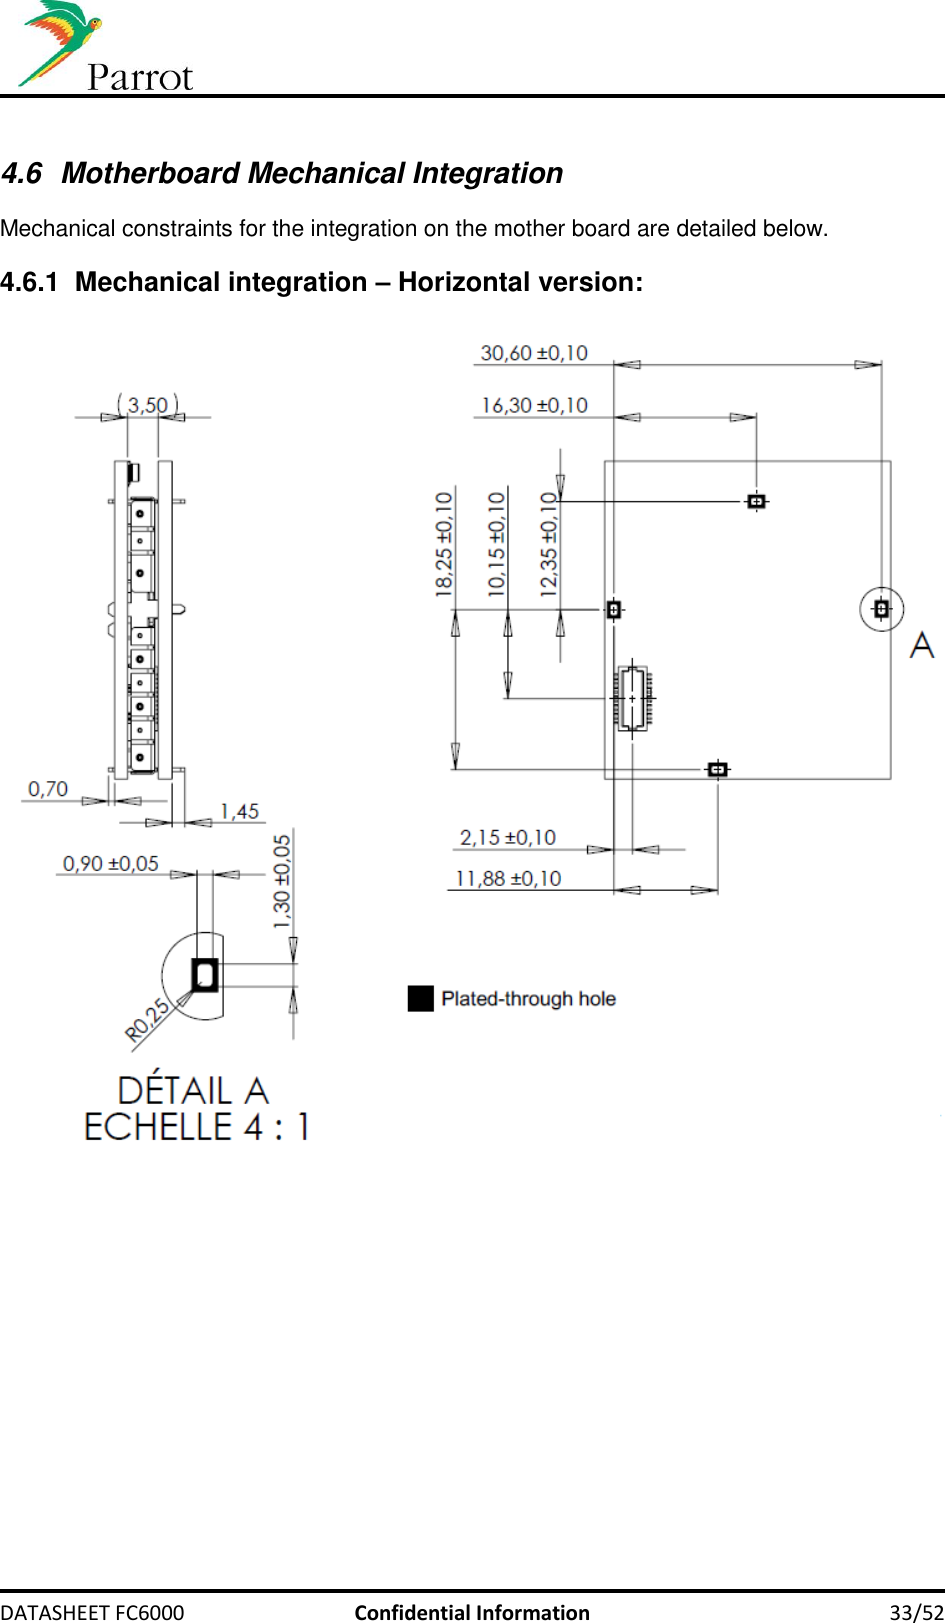     DATASHEET FC6000  Confidential Information 33/52  4.6  Motherboard Mechanical Integration Mechanical constraints for the integration on the mother board are detailed below.  4.6.1  Mechanical integration – Horizontal version:      